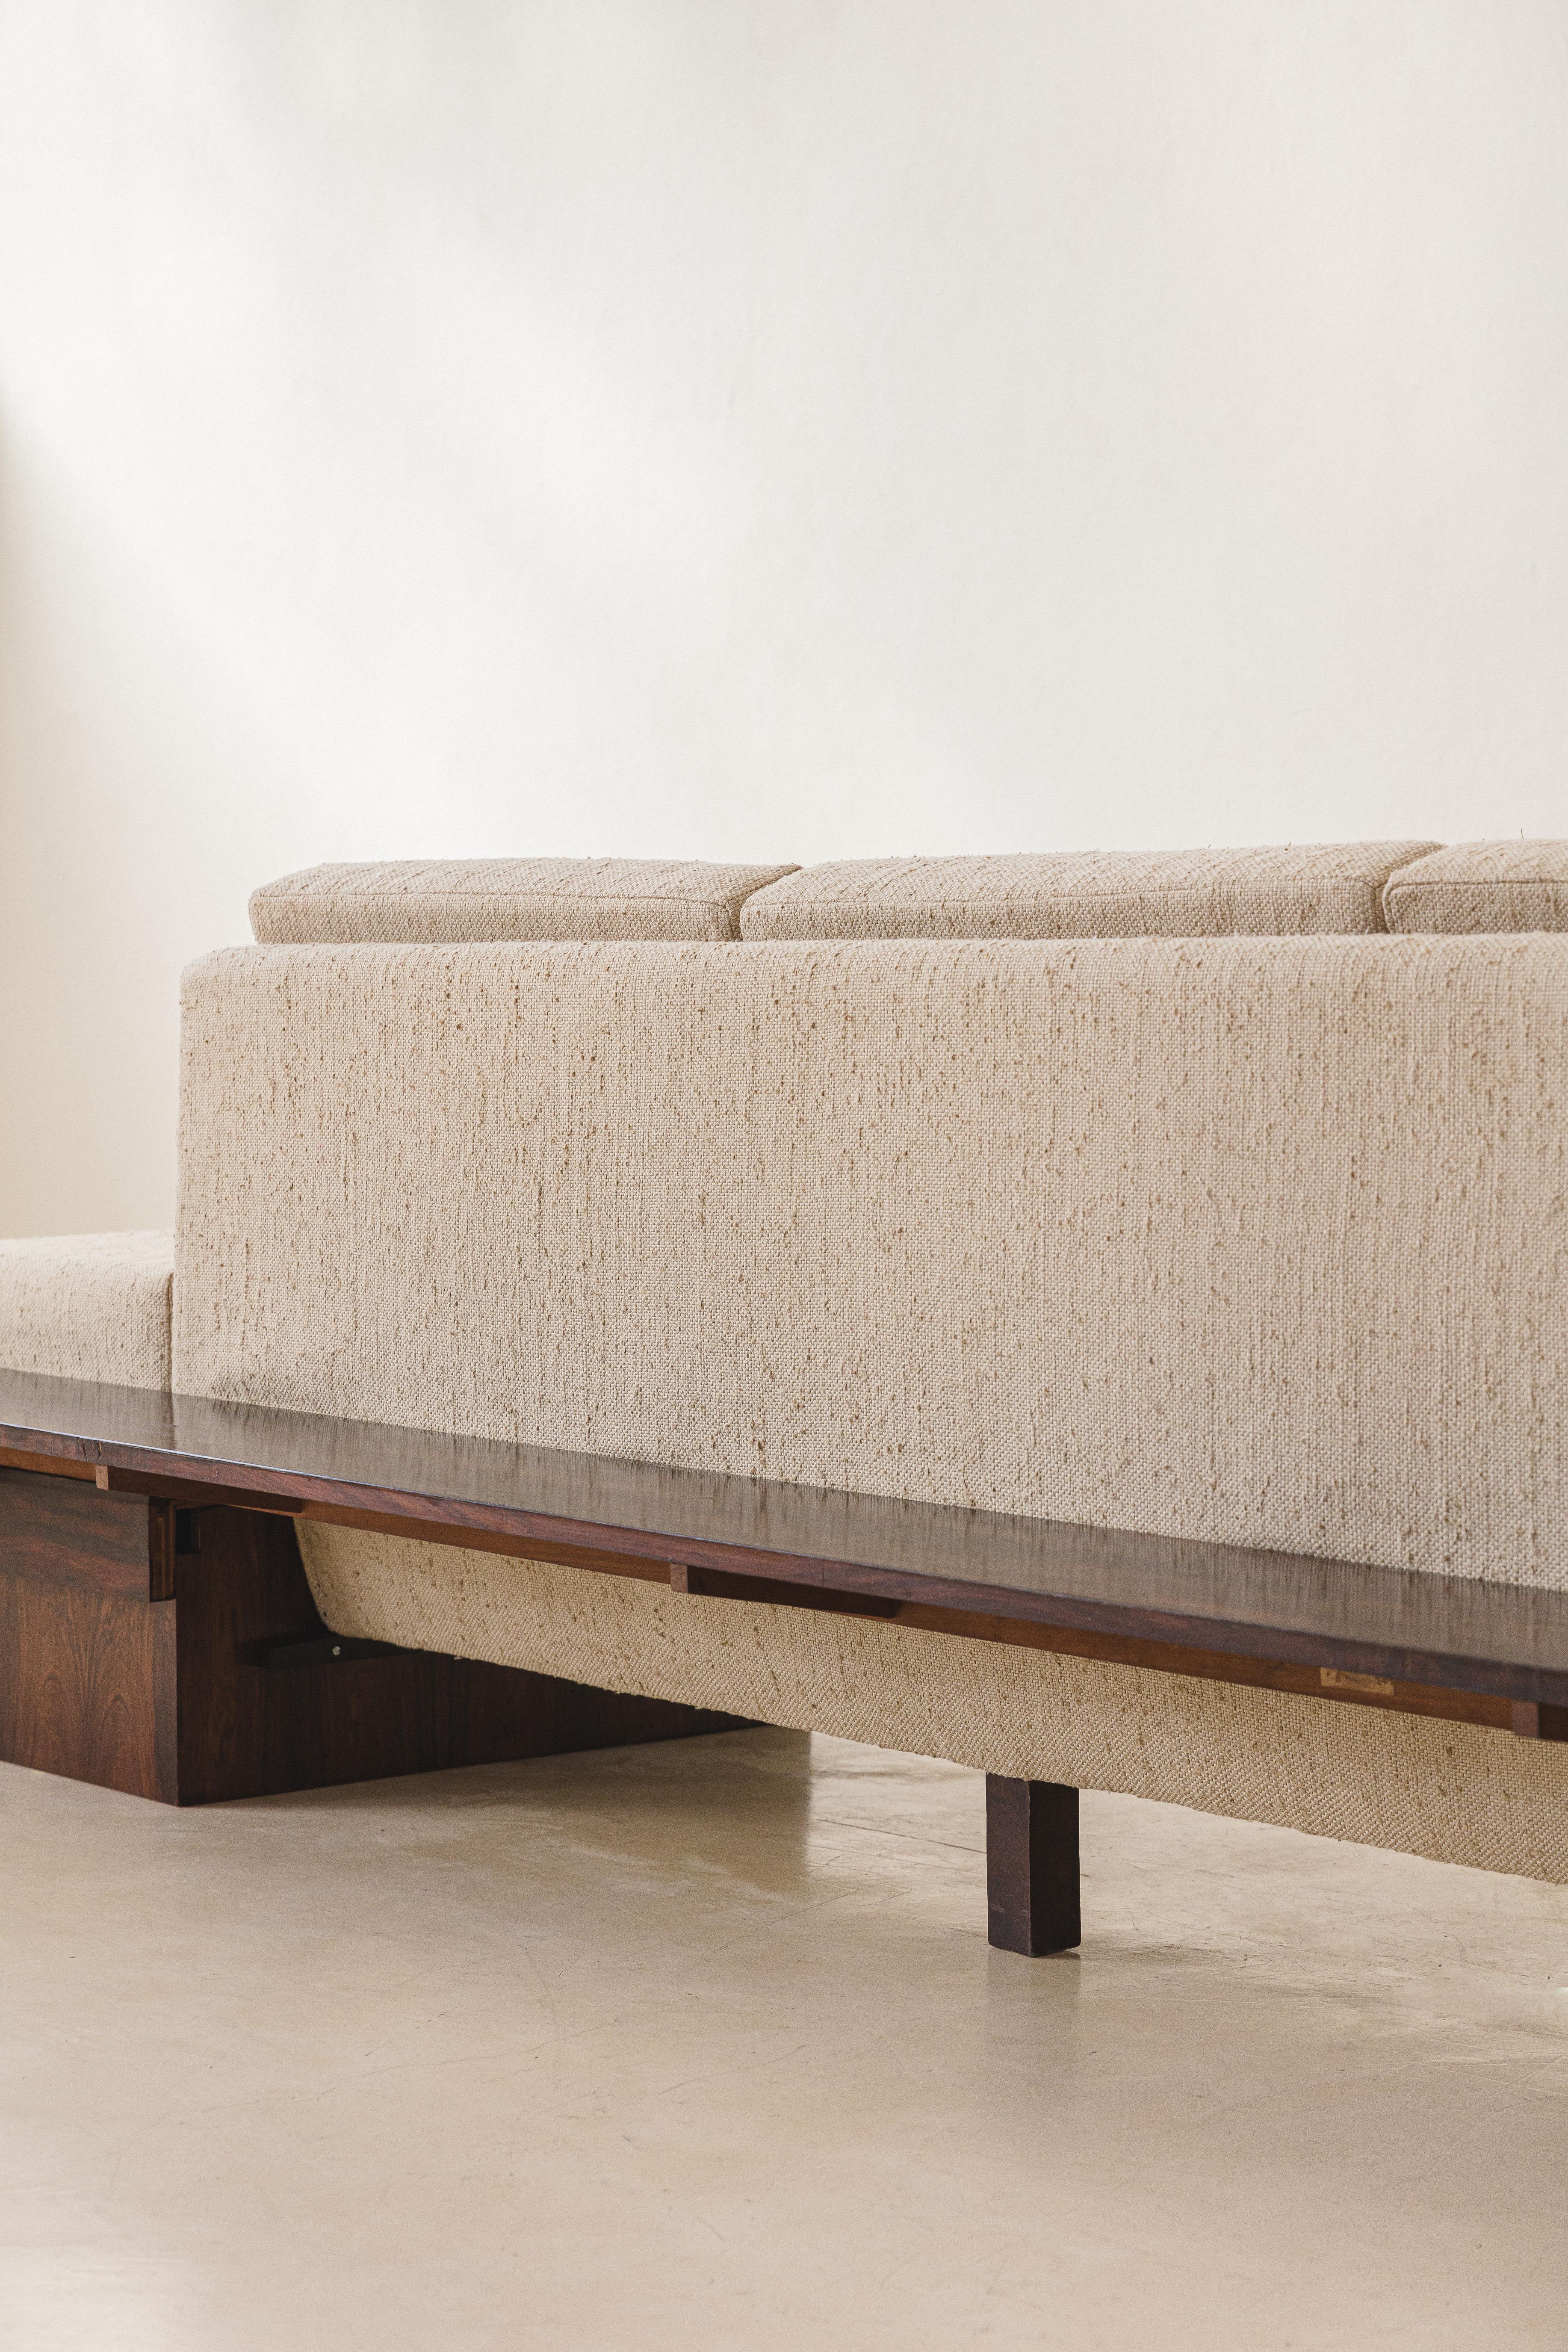 Midcentury Brazilian Sofa Design by Joaquim Tenreiro, Rosewood and Marble, 1960s For Sale 10